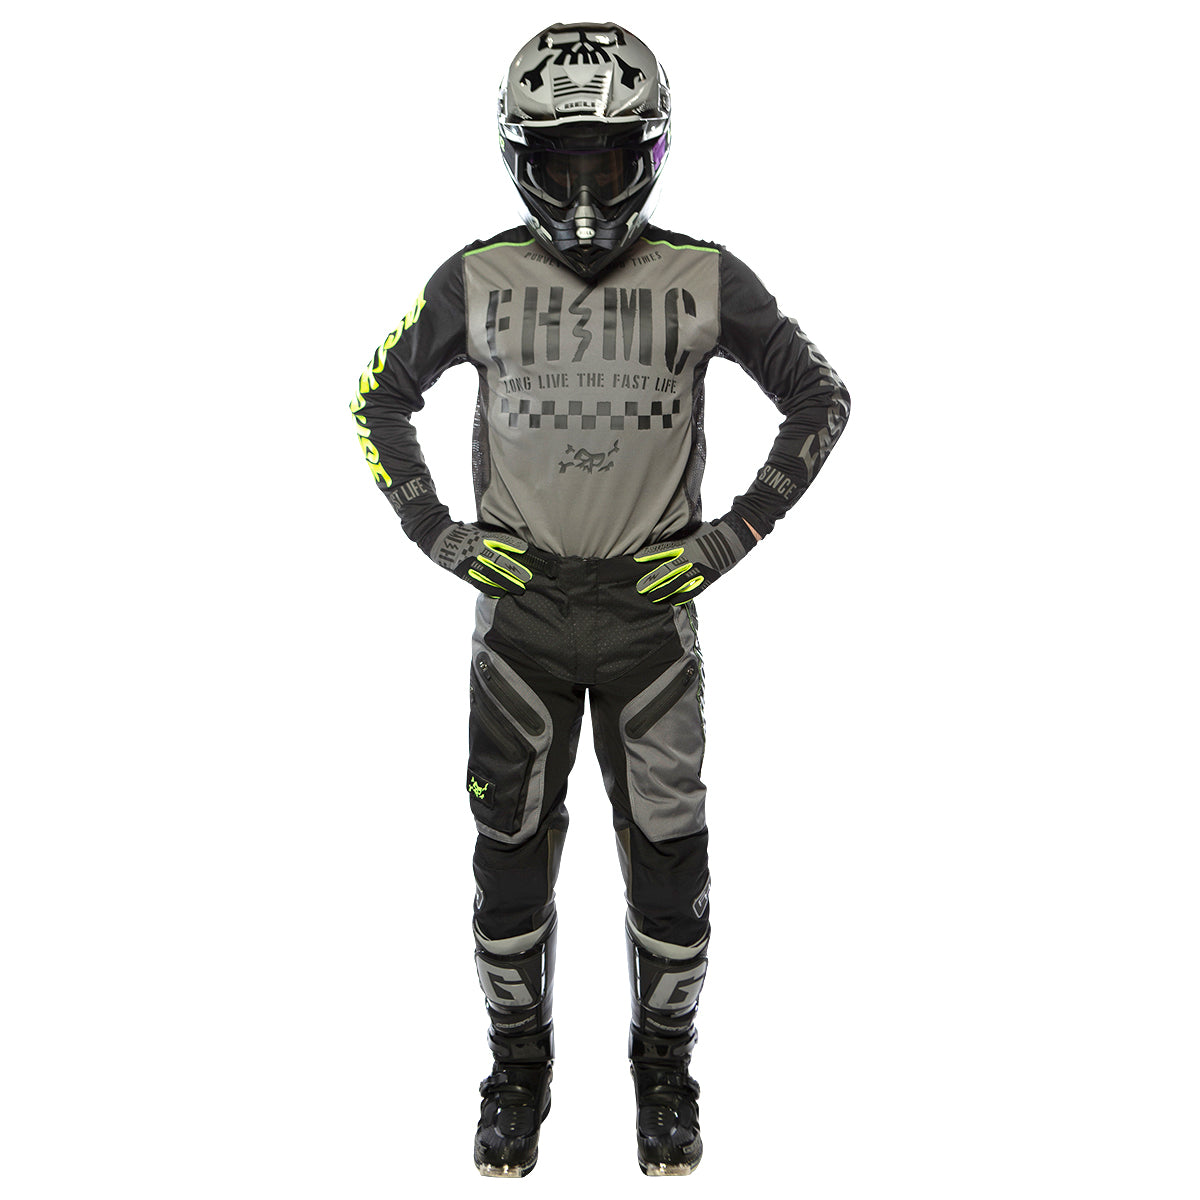 Off-Road Grindhouse Pant - Gray